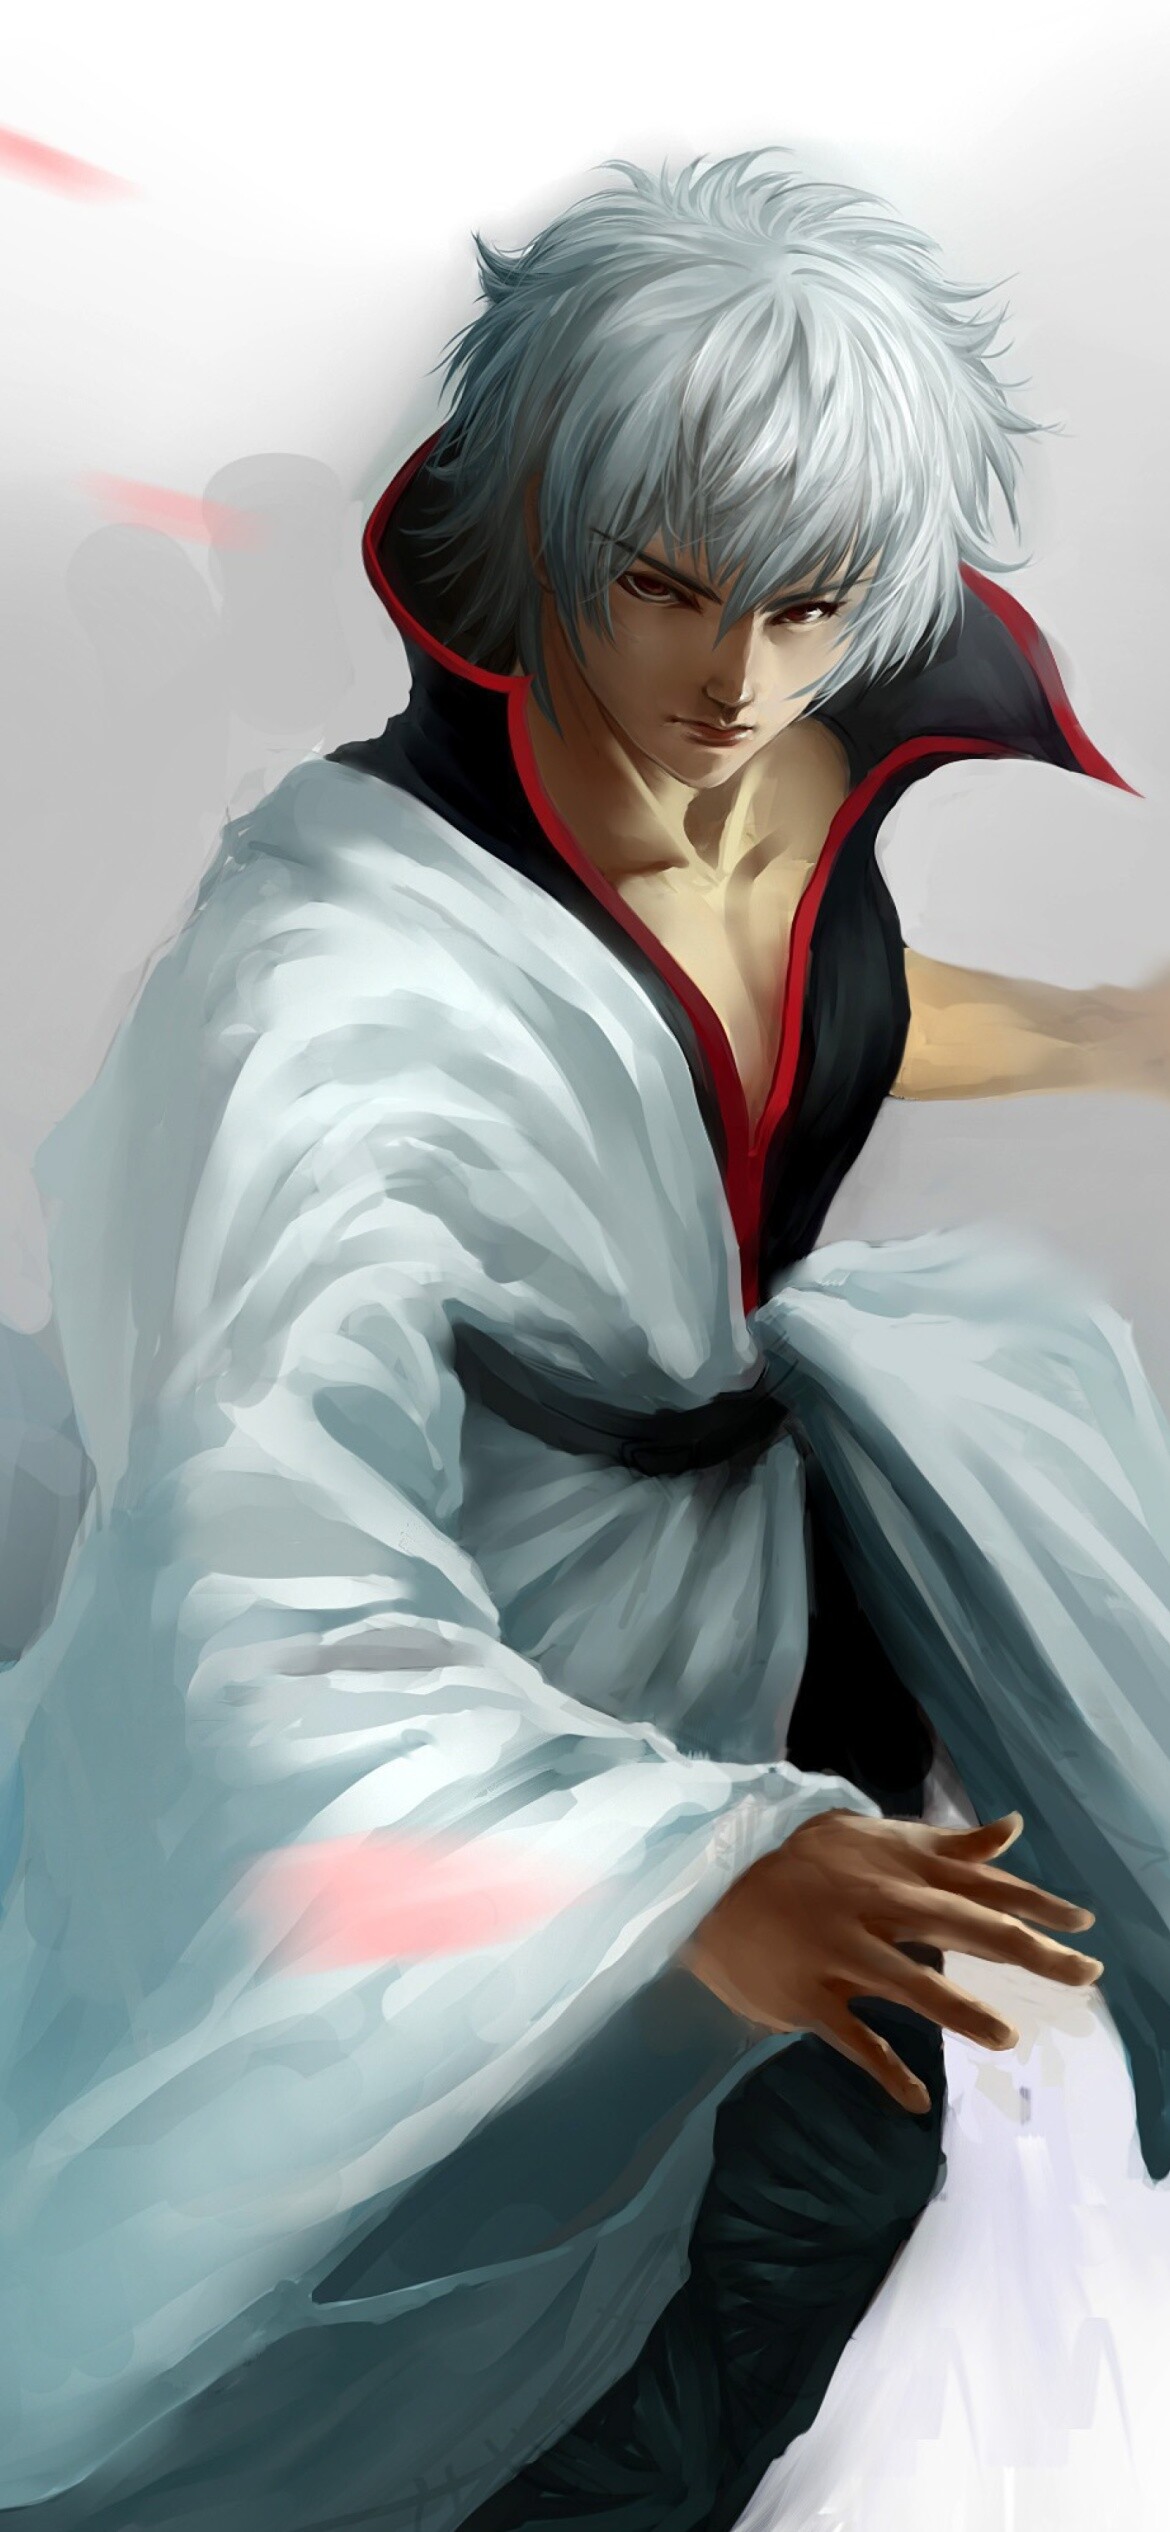 Gintama (TV Series): Sakata Gintoki, Silvery-blue hair in a perpetually messy state, Often seen wearing a dumb expression on his face. 1170x2540 HD Wallpaper.